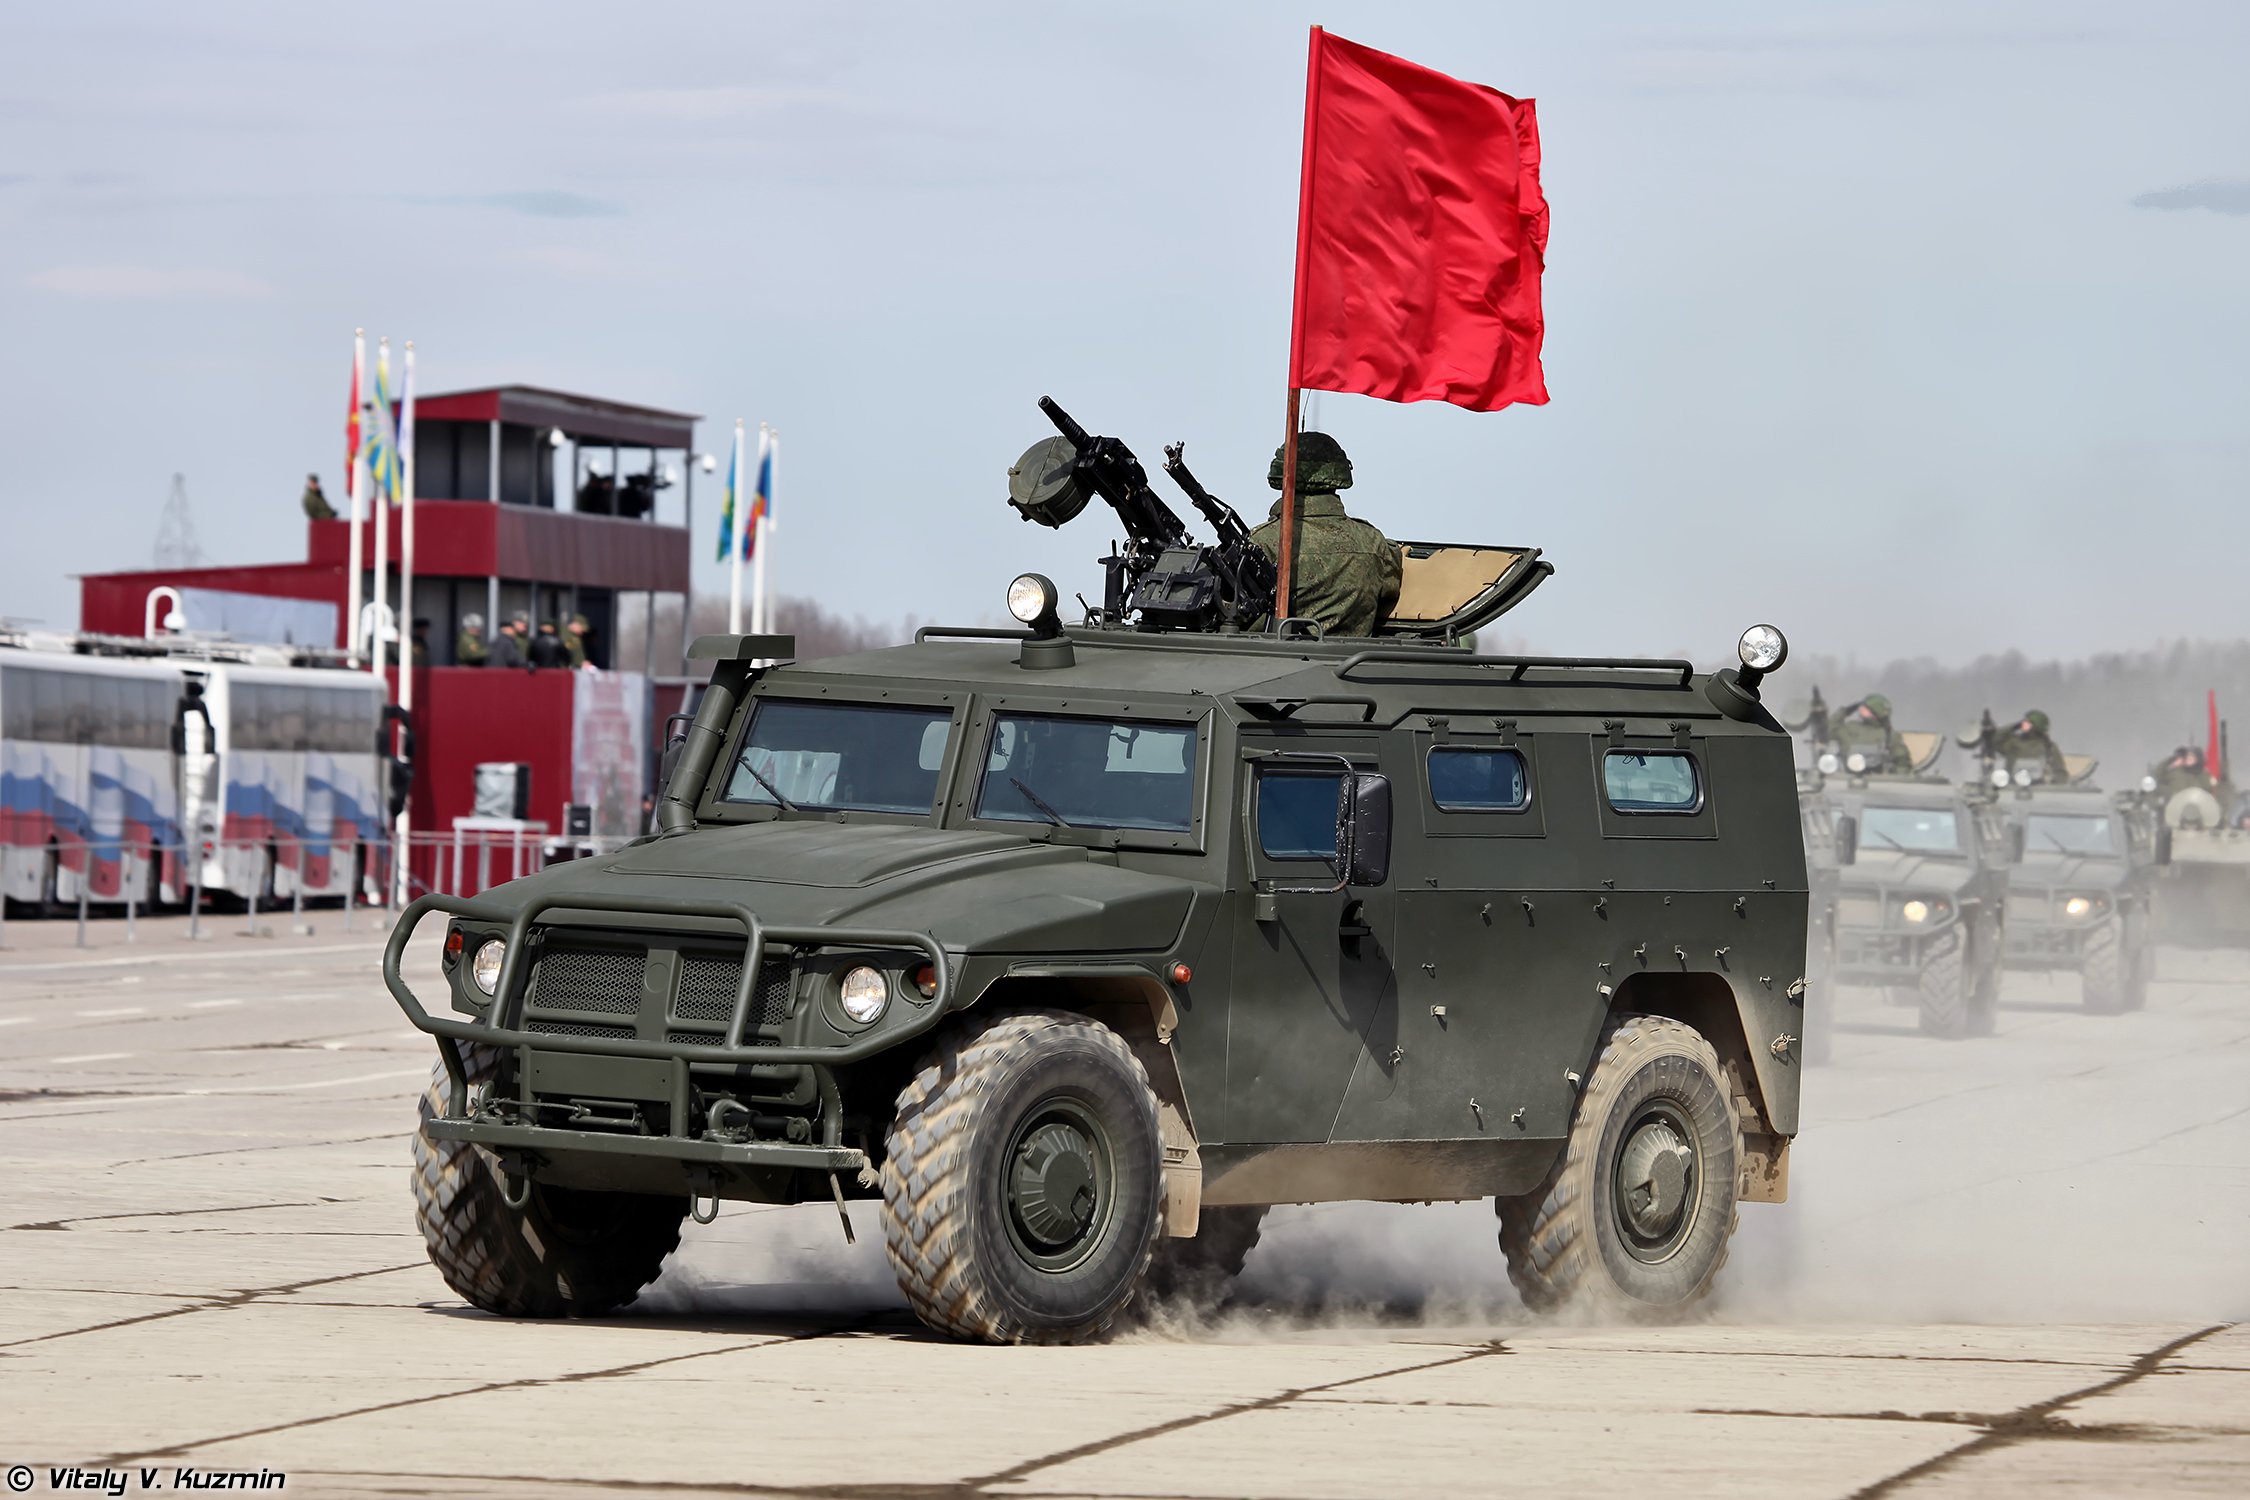 gaz 233014, Tigr, 4x4, Armoured, Red, Flag, April, 9th, Rehearsal, In, Alabino, Of, 2014, Victory, Day, Parade, Russia, Military, Army, Russian Wallpaper